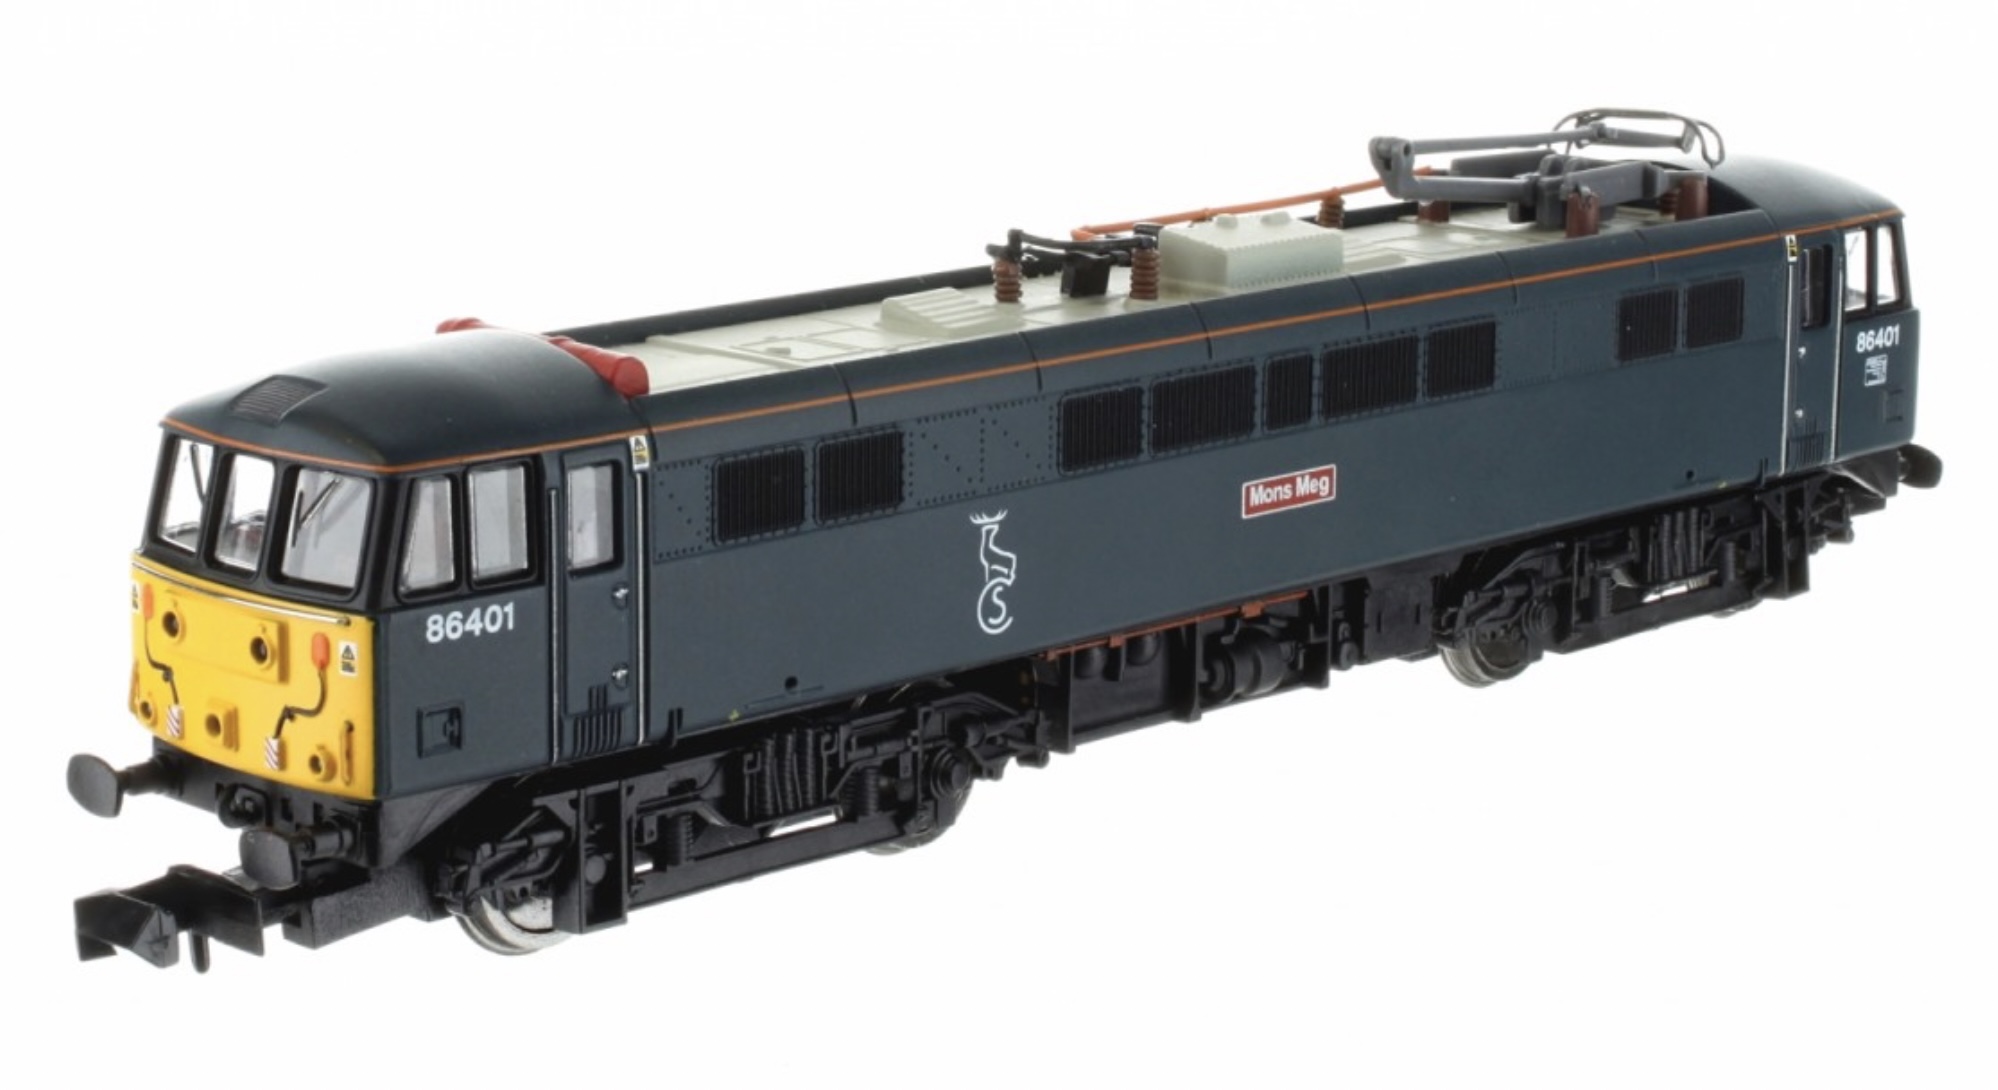 N Scale - Dapol - 2D-026-001D - Locomotive, Electric, Class 86 - Painted/Lettered - 86401